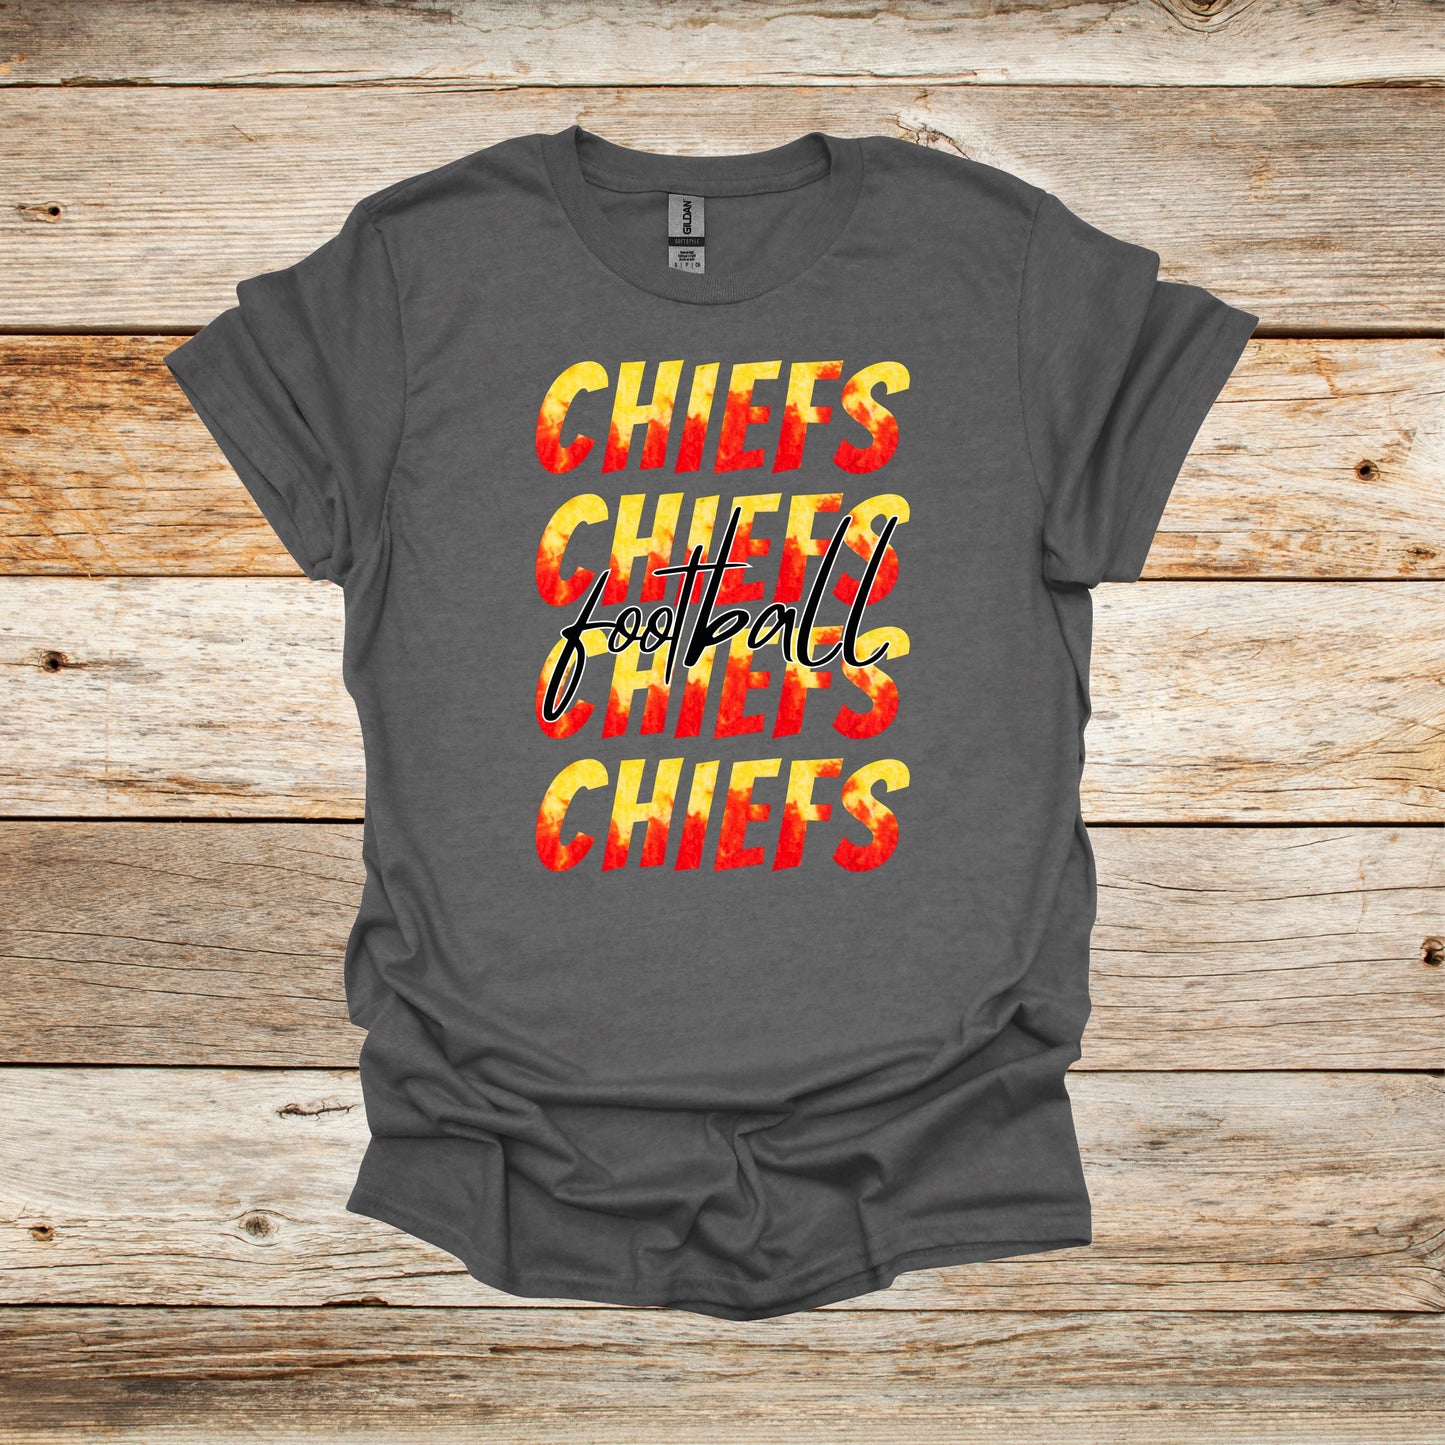 Football T-Shirt - Kansas City Chiefs - Chiefs Football - Adult and Children's Tee Shirts - Sports T-Shirts Graphic Avenue Graphite Heather Adult Small 